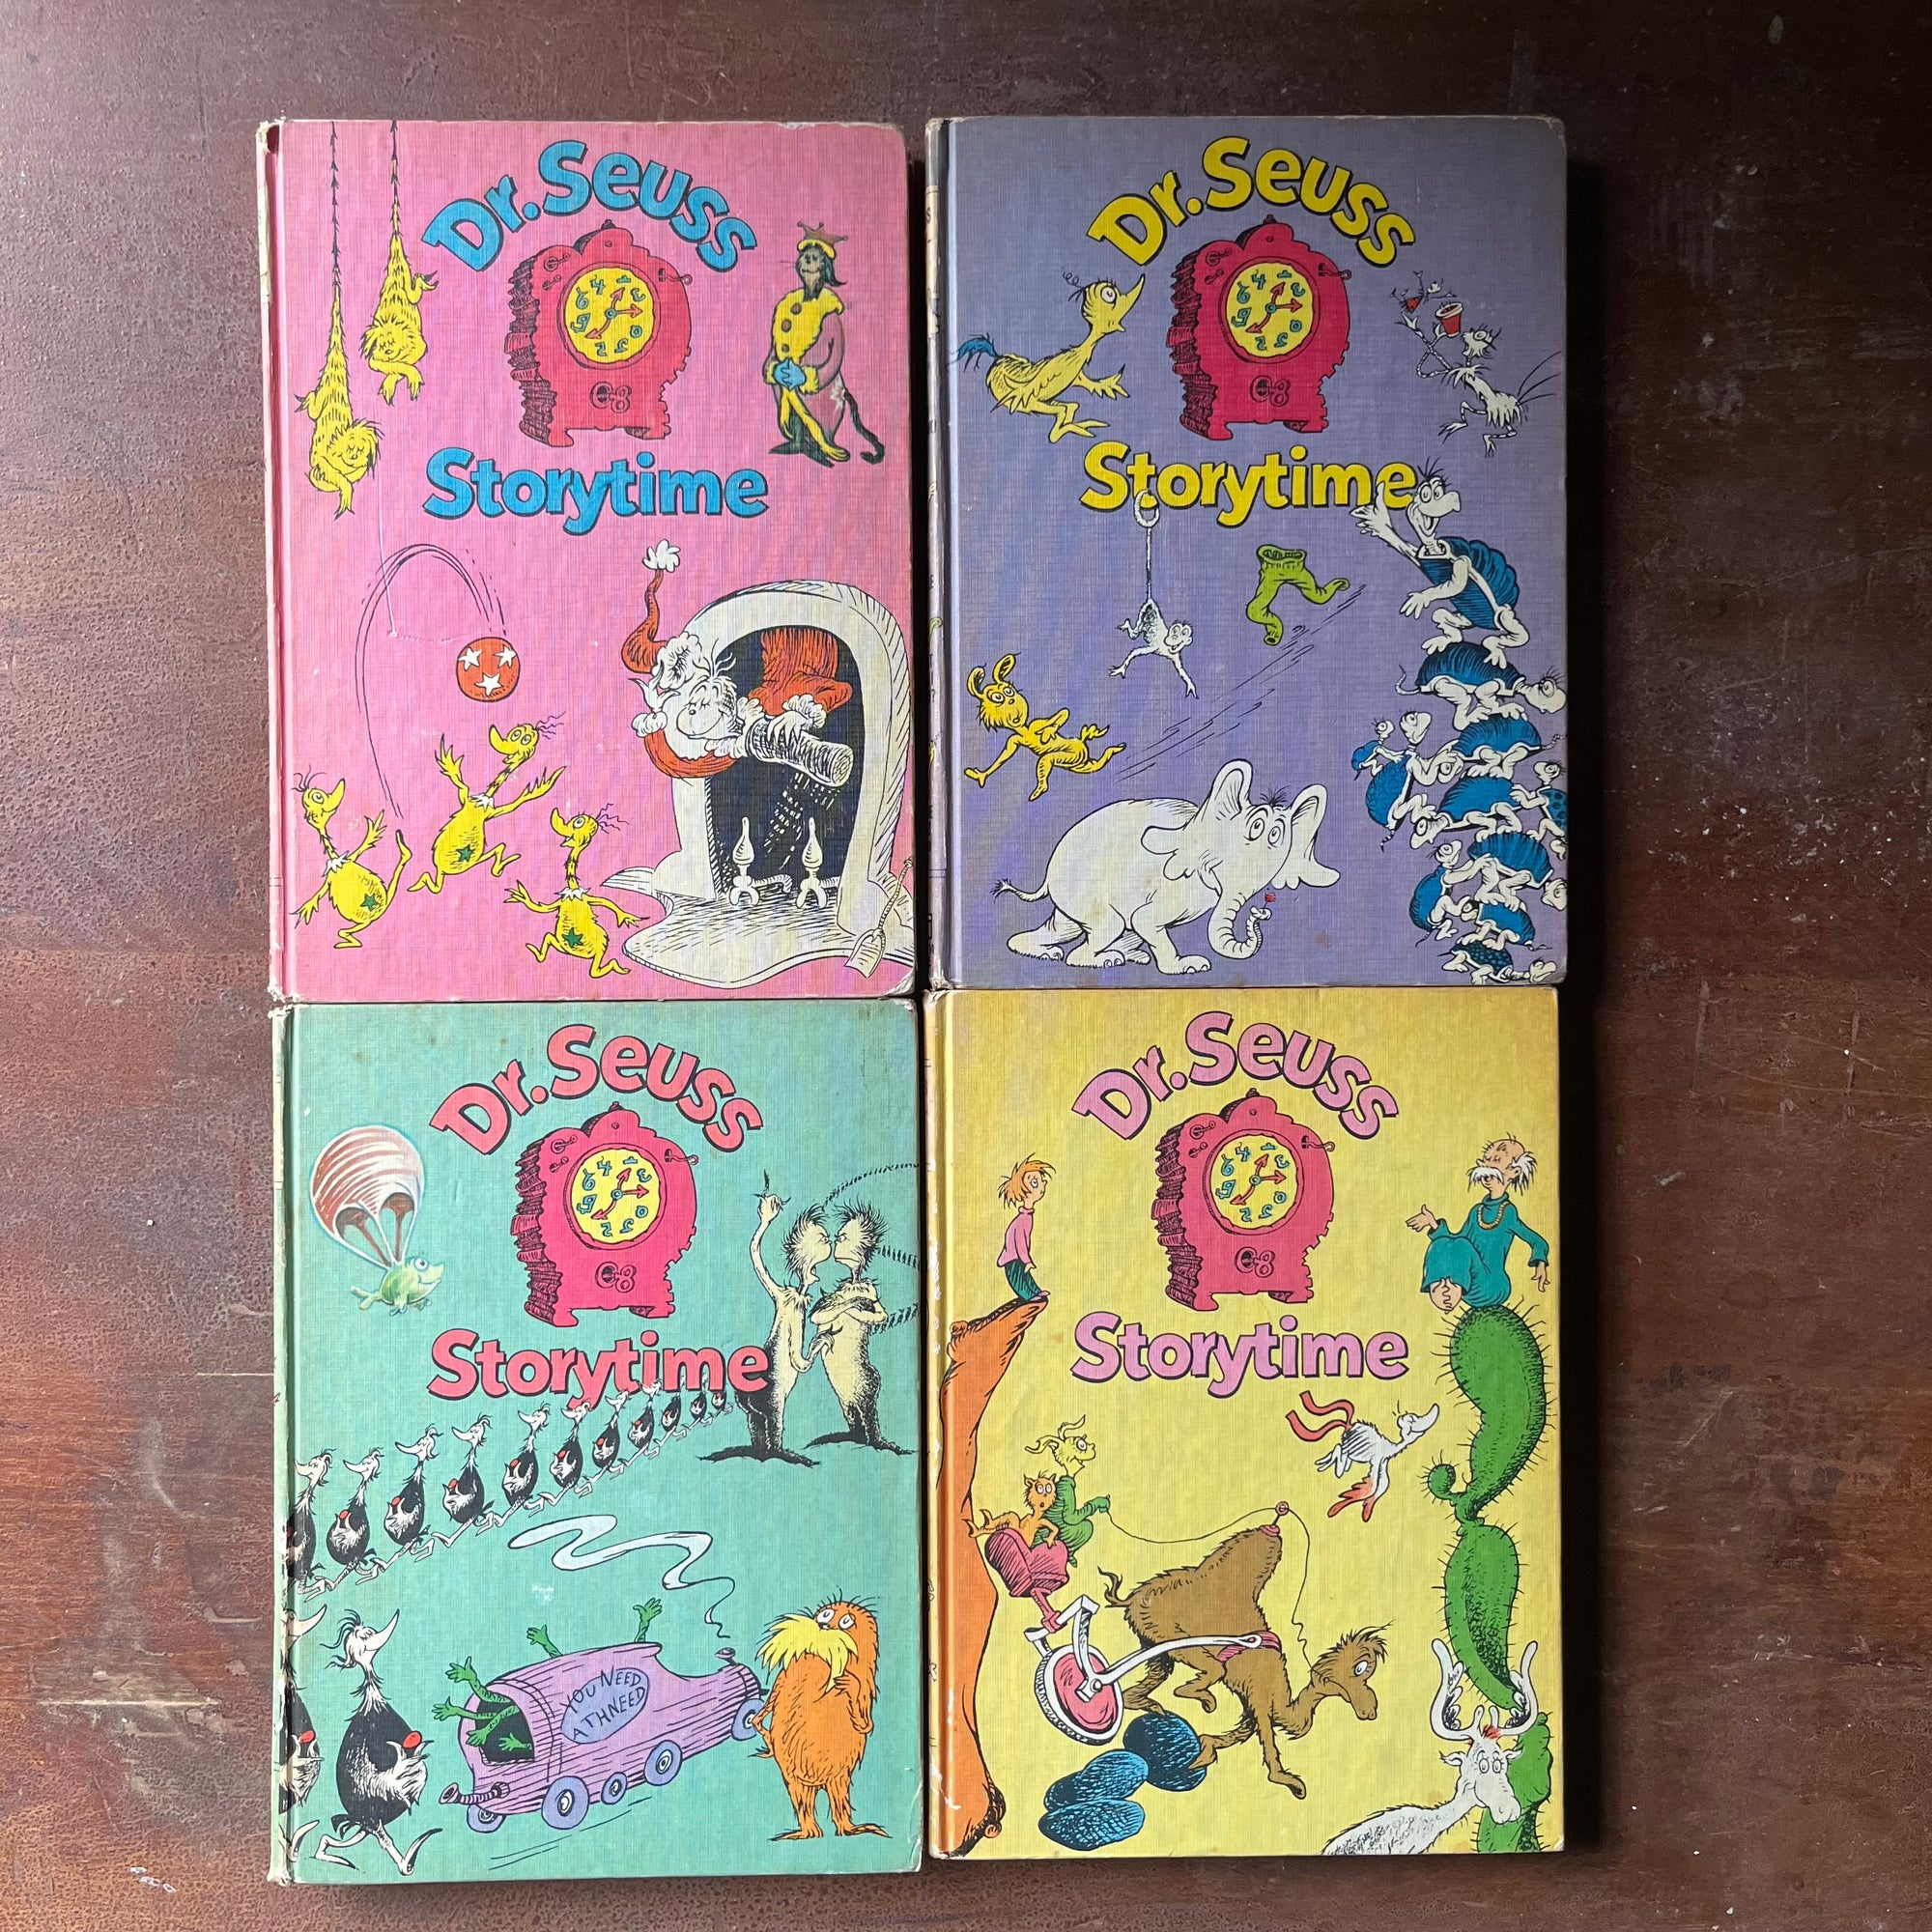 vintage children's books - Random House Dr. Seuss Storytime Book Set of 4 written & illustrated by Dr. Seuss - view of the front covers in colorful designs featuring characters from the stories within the pages